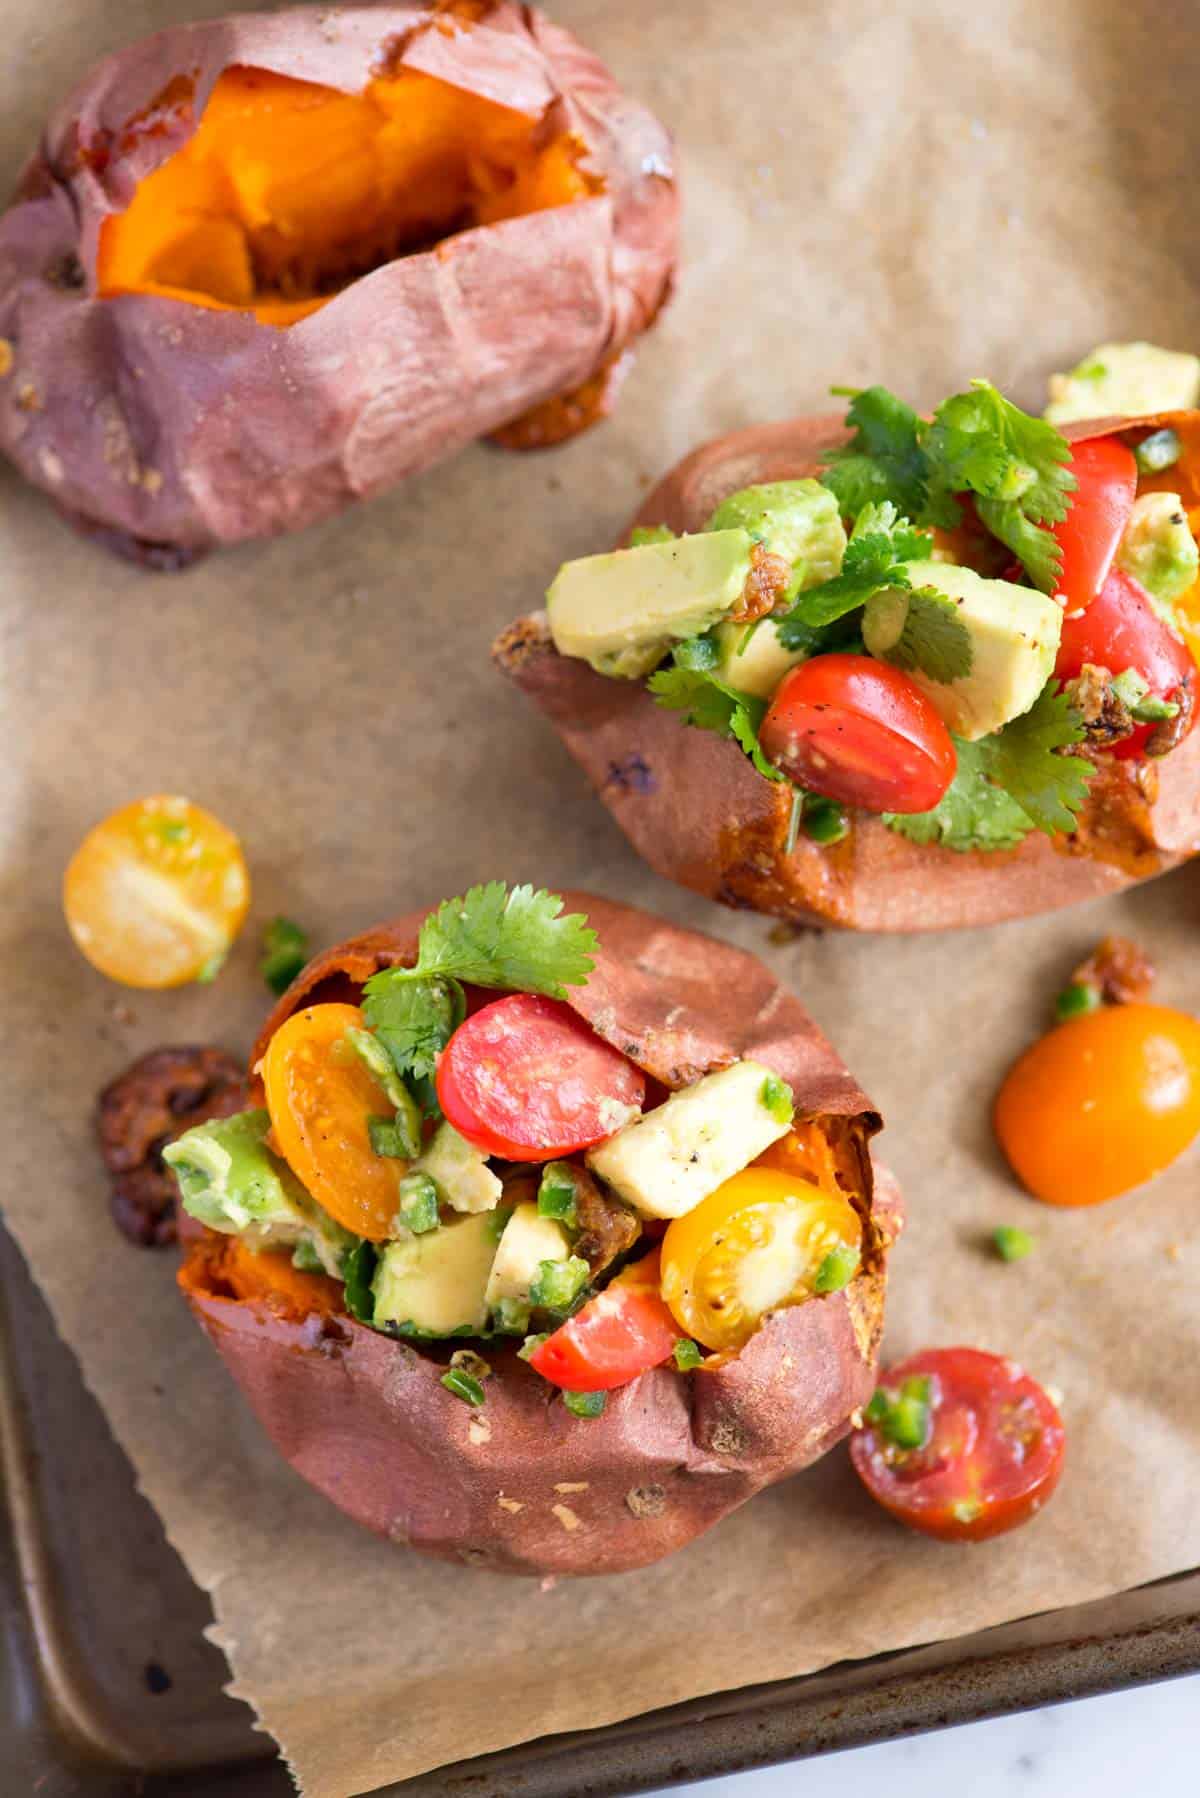 Baked sweet potatoes stuffed with roasted garlic, avocado and tomato salsa (delicious, vegetarian and vegan).